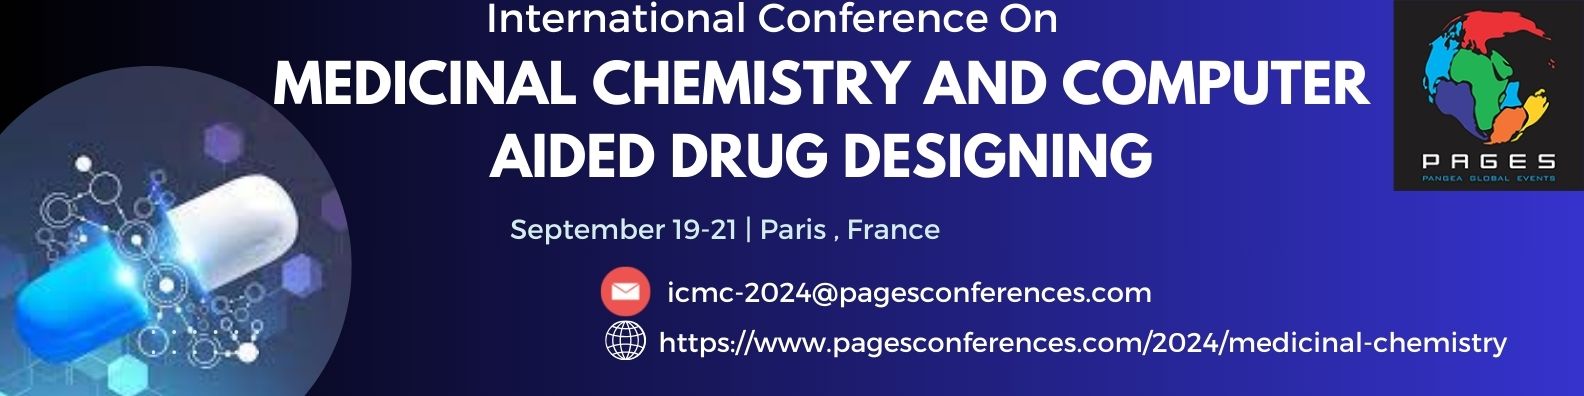 International Conference on Medicinal Chemistry and Computer Aided Drug Designing